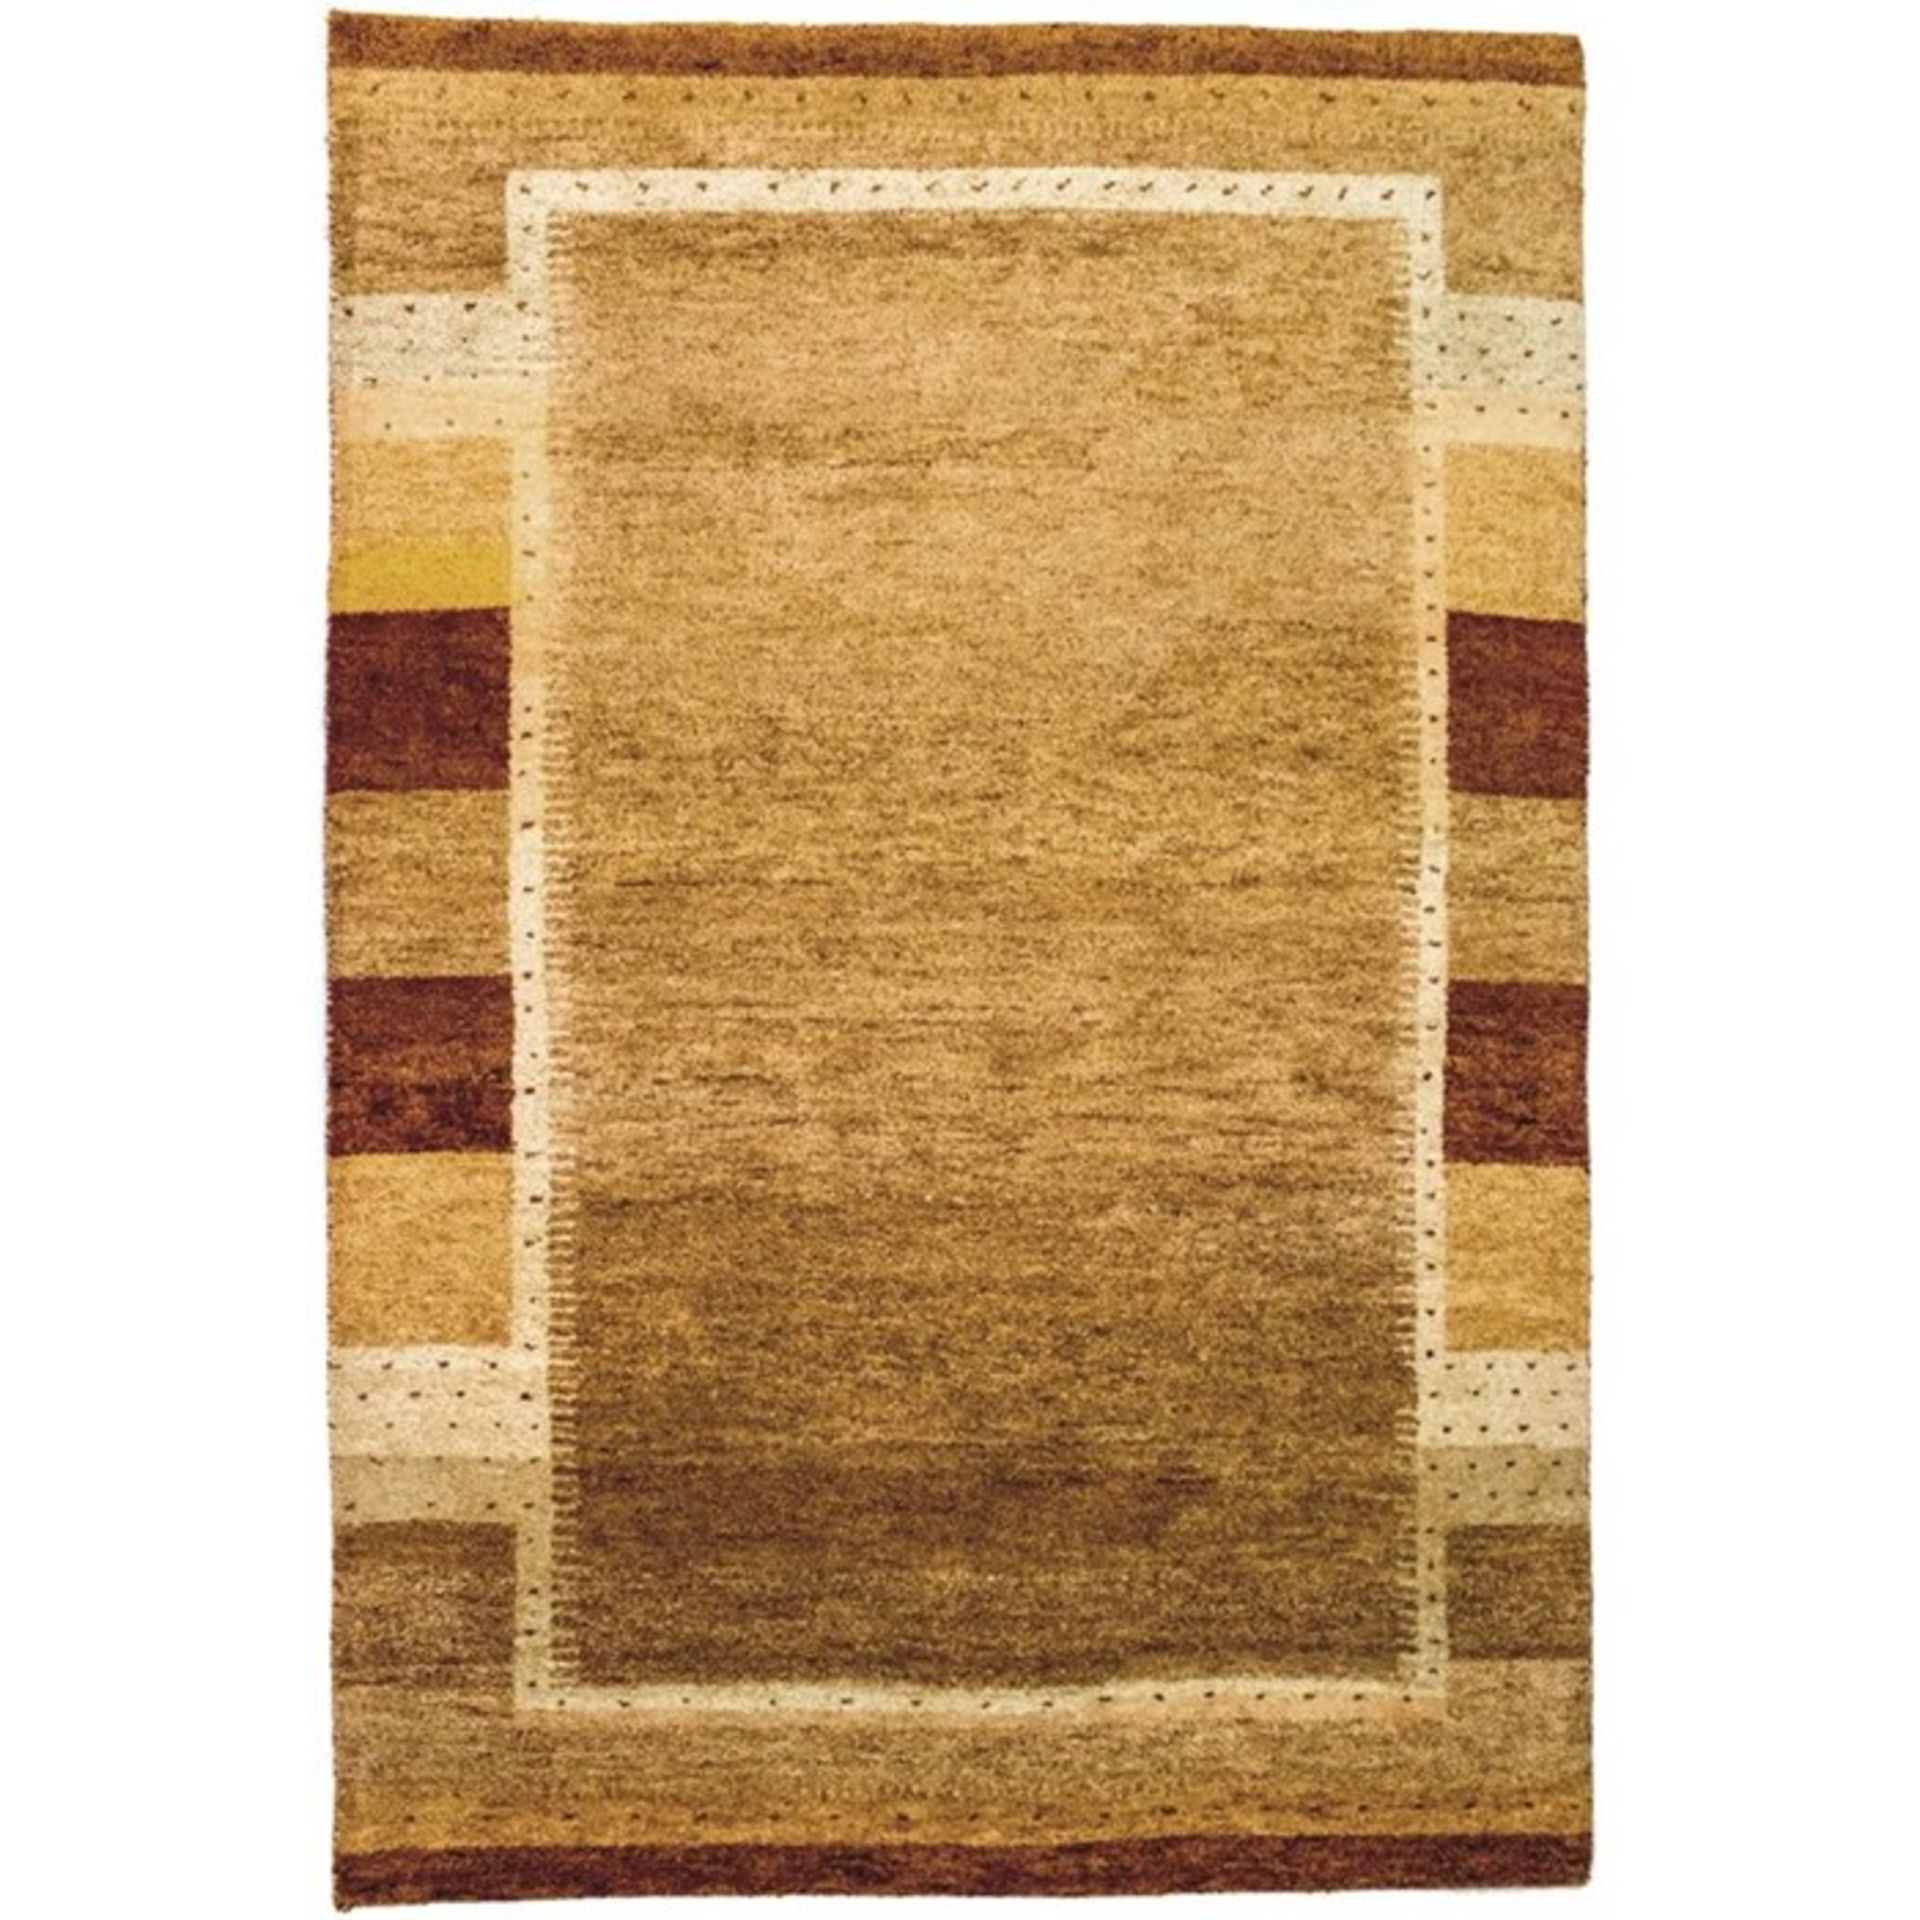 Union Rustic,Gingerich Hand Tufted Brown Outdoor Rug RRP - £359.99 (H16053 - 11/41 -BF907576.